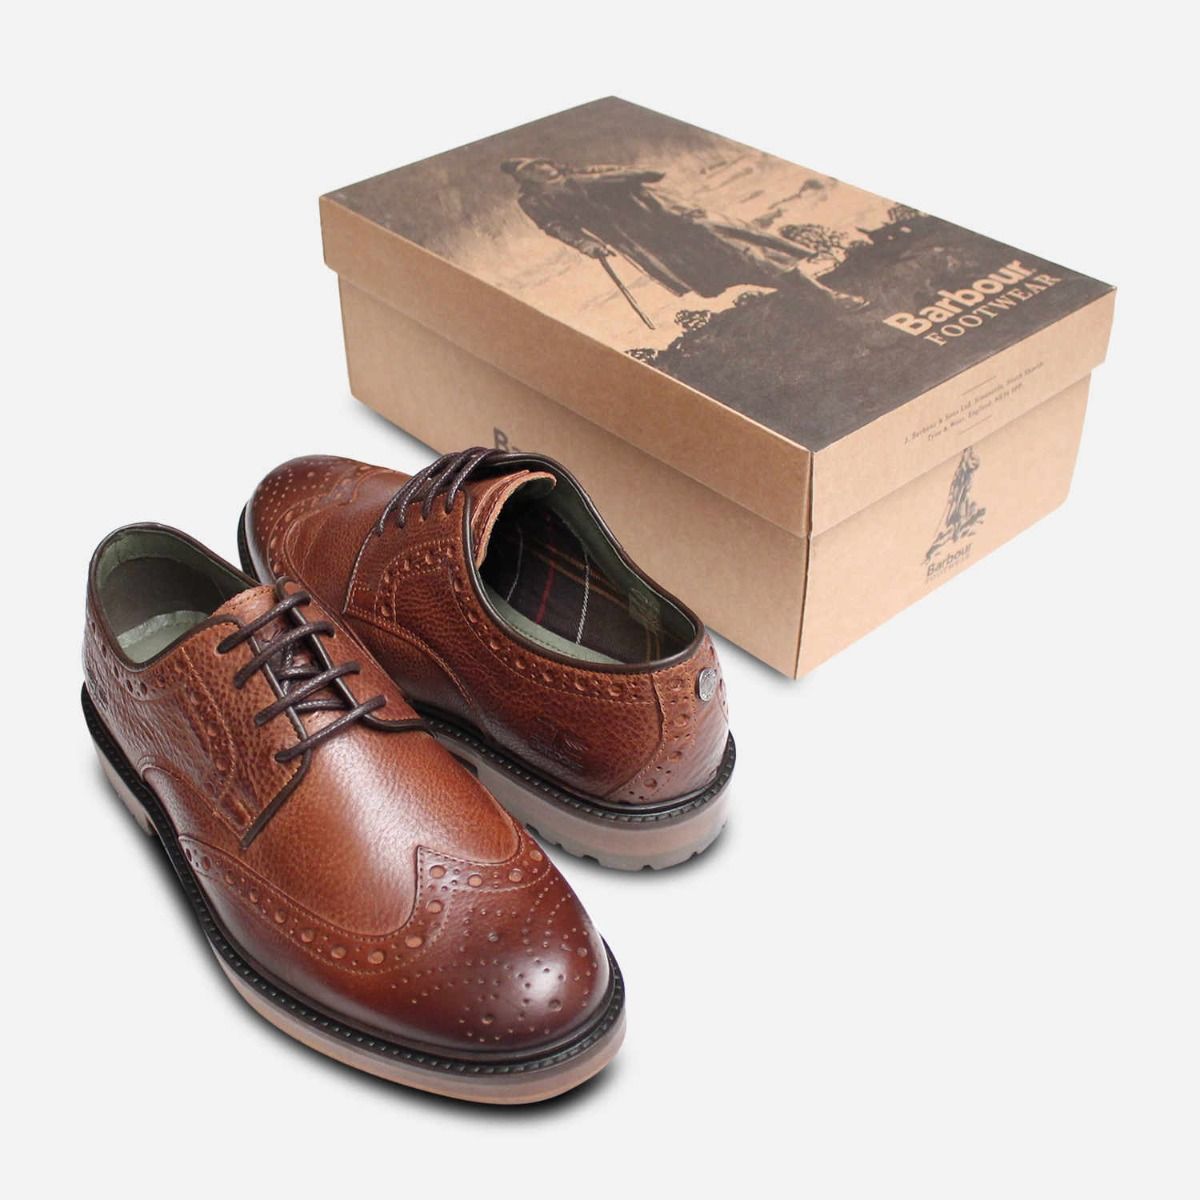 barbour palmer brogues